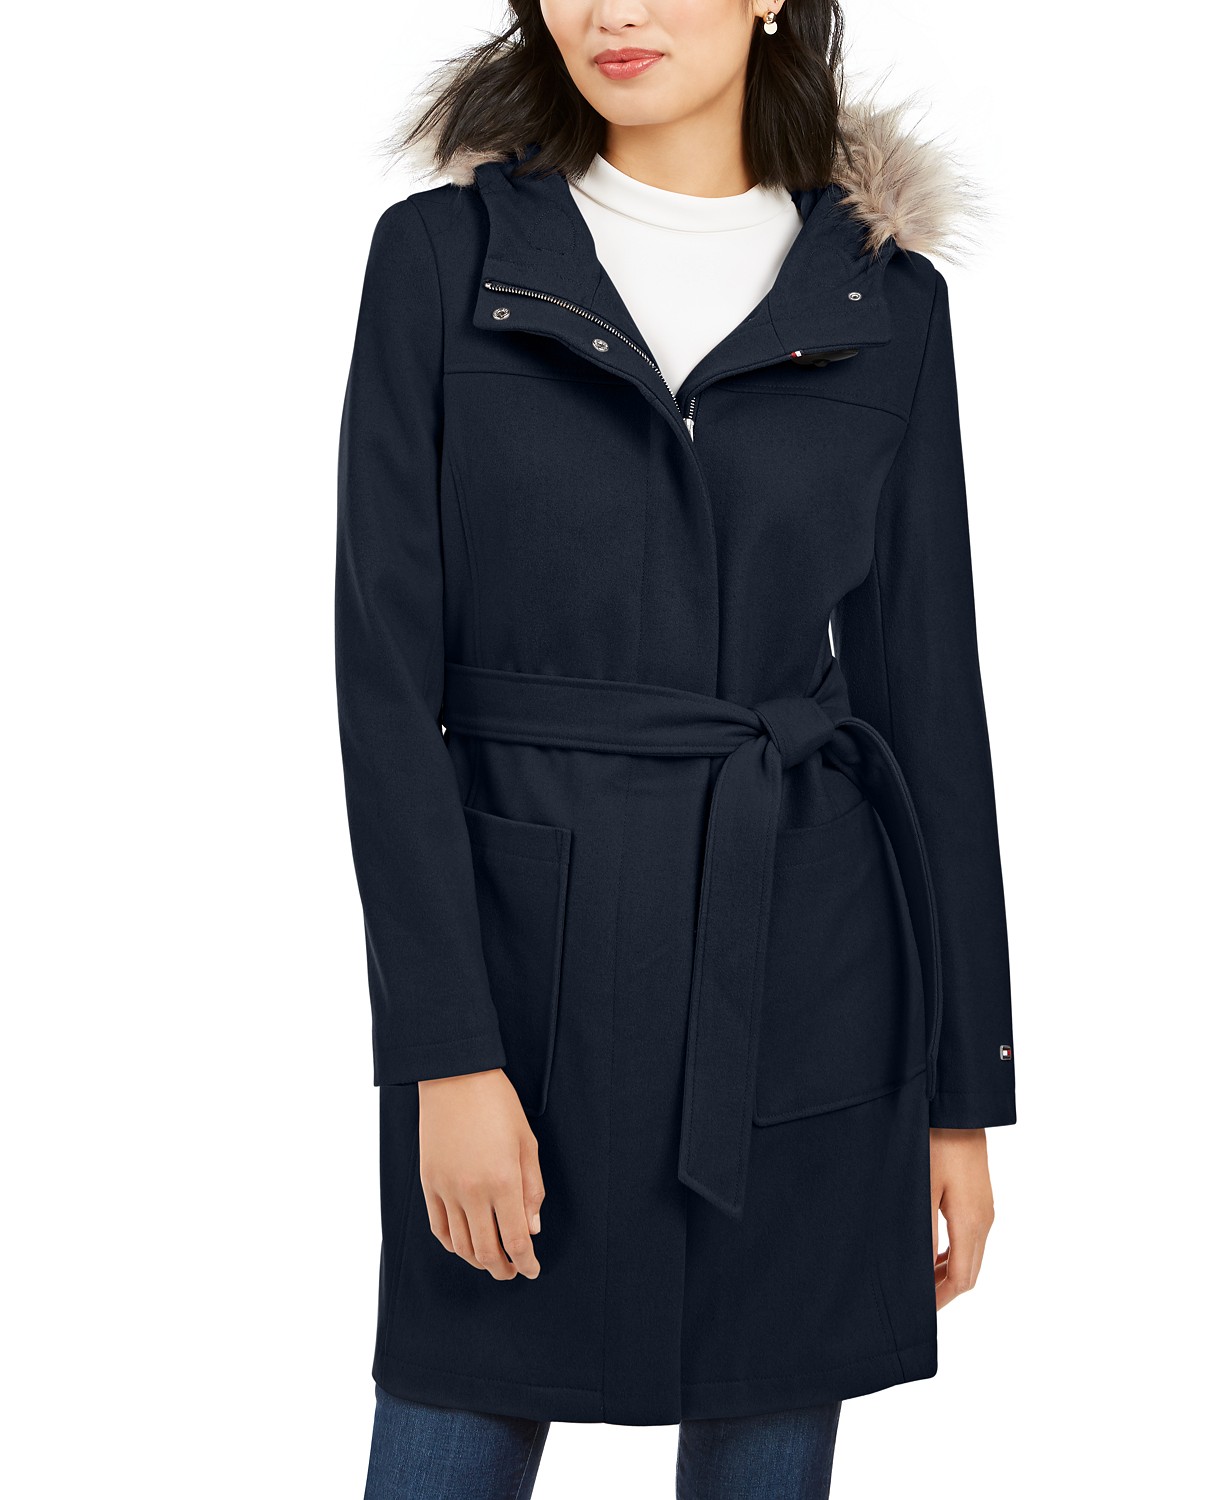 woocommerce-673321-2209615.cloudwaysapps.com-tommy-hilfiger-womens-navy-wool-blend-belted-faux-fur-trim-hooded-coat